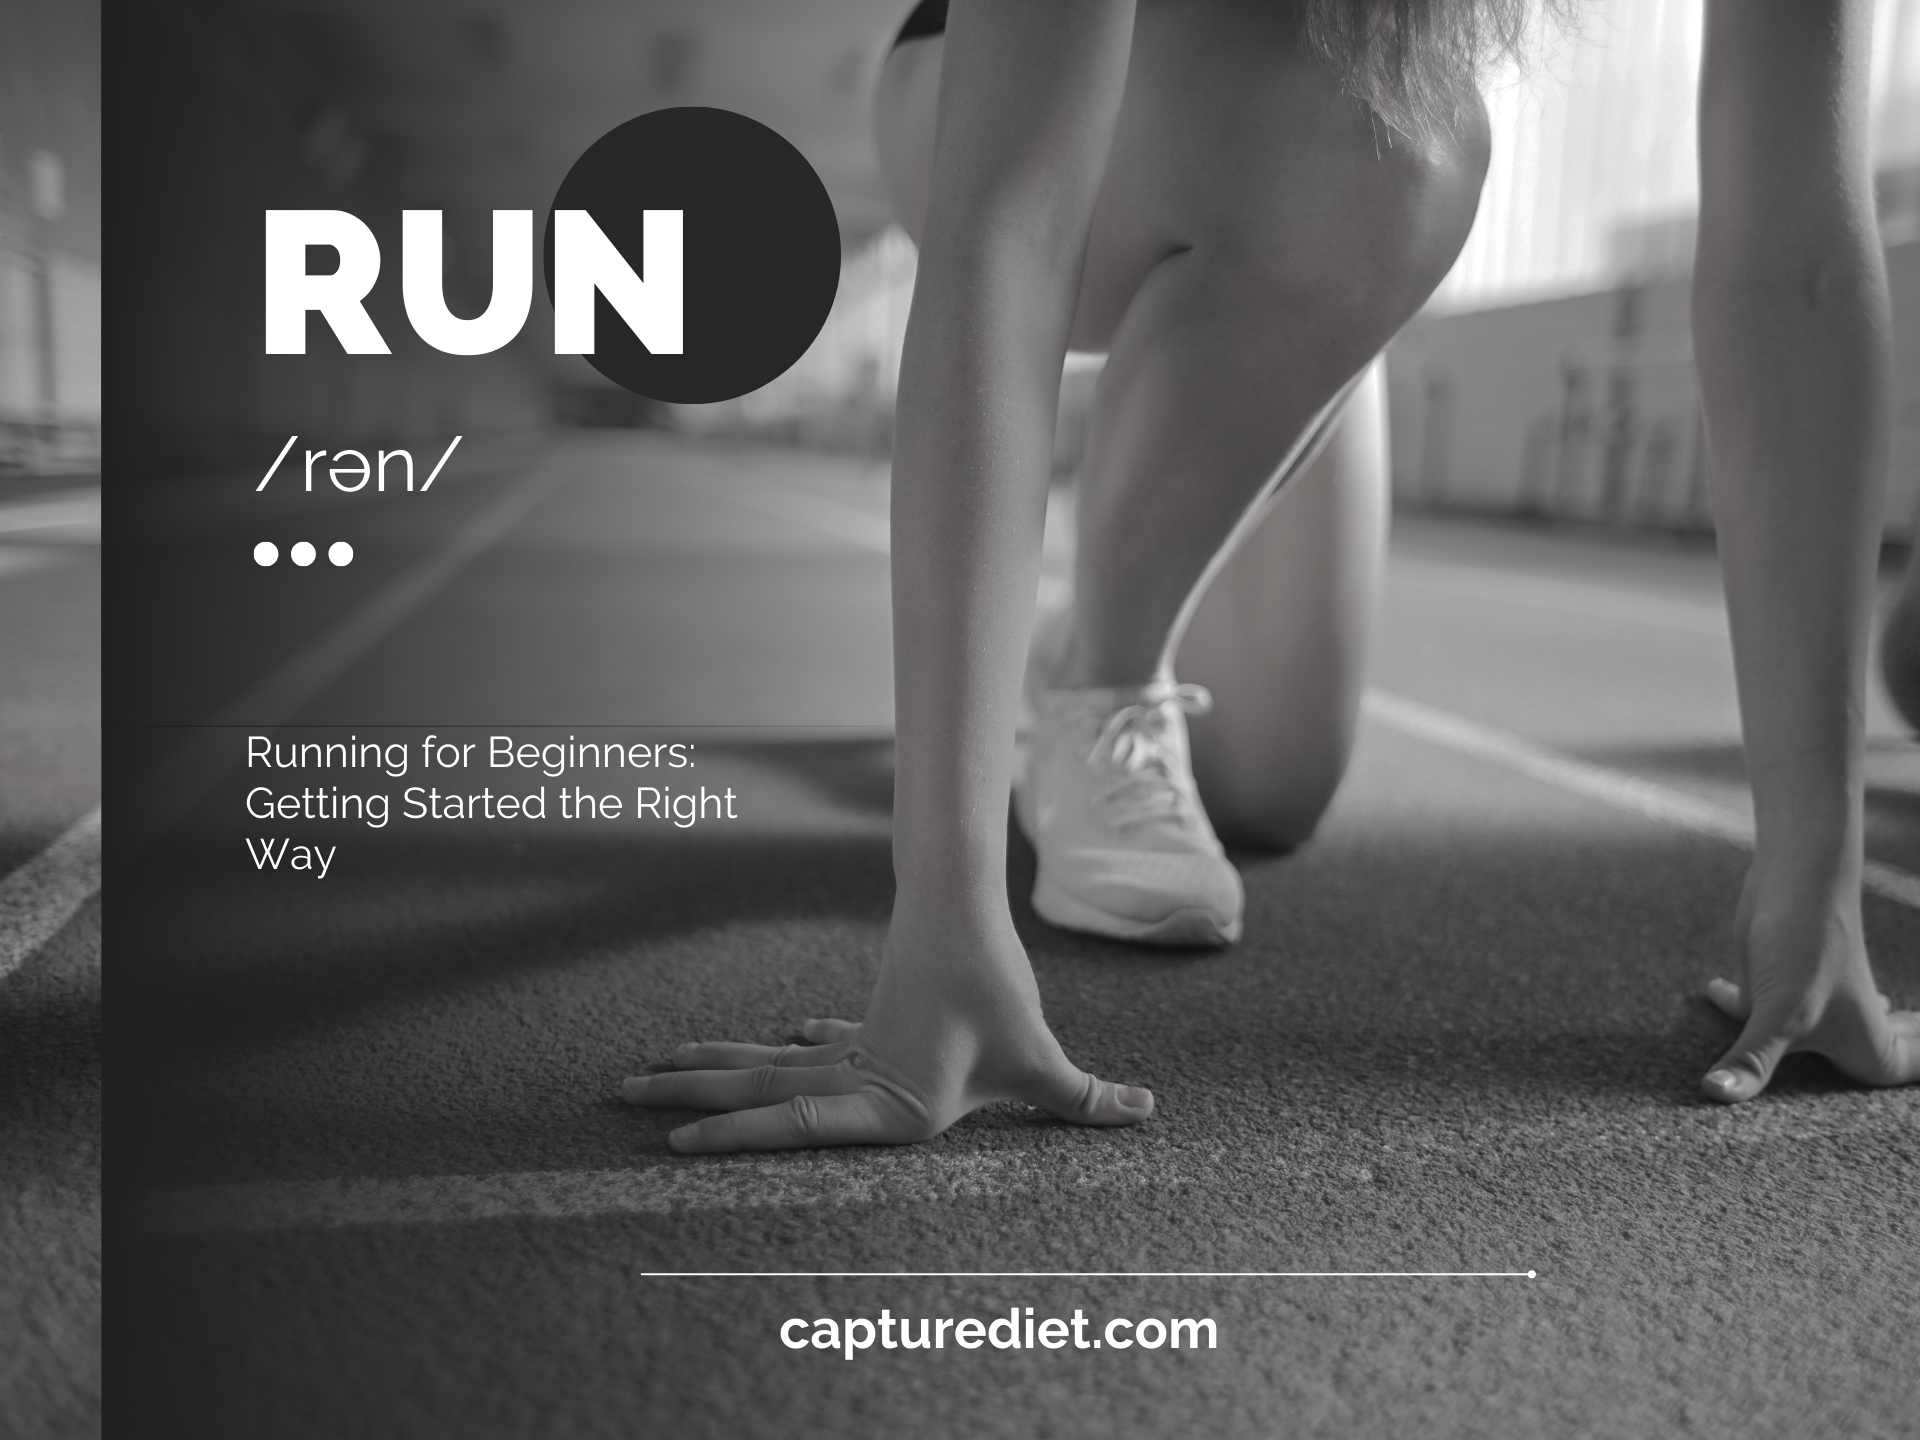 Running for Beginners: Getting Started the Right Way